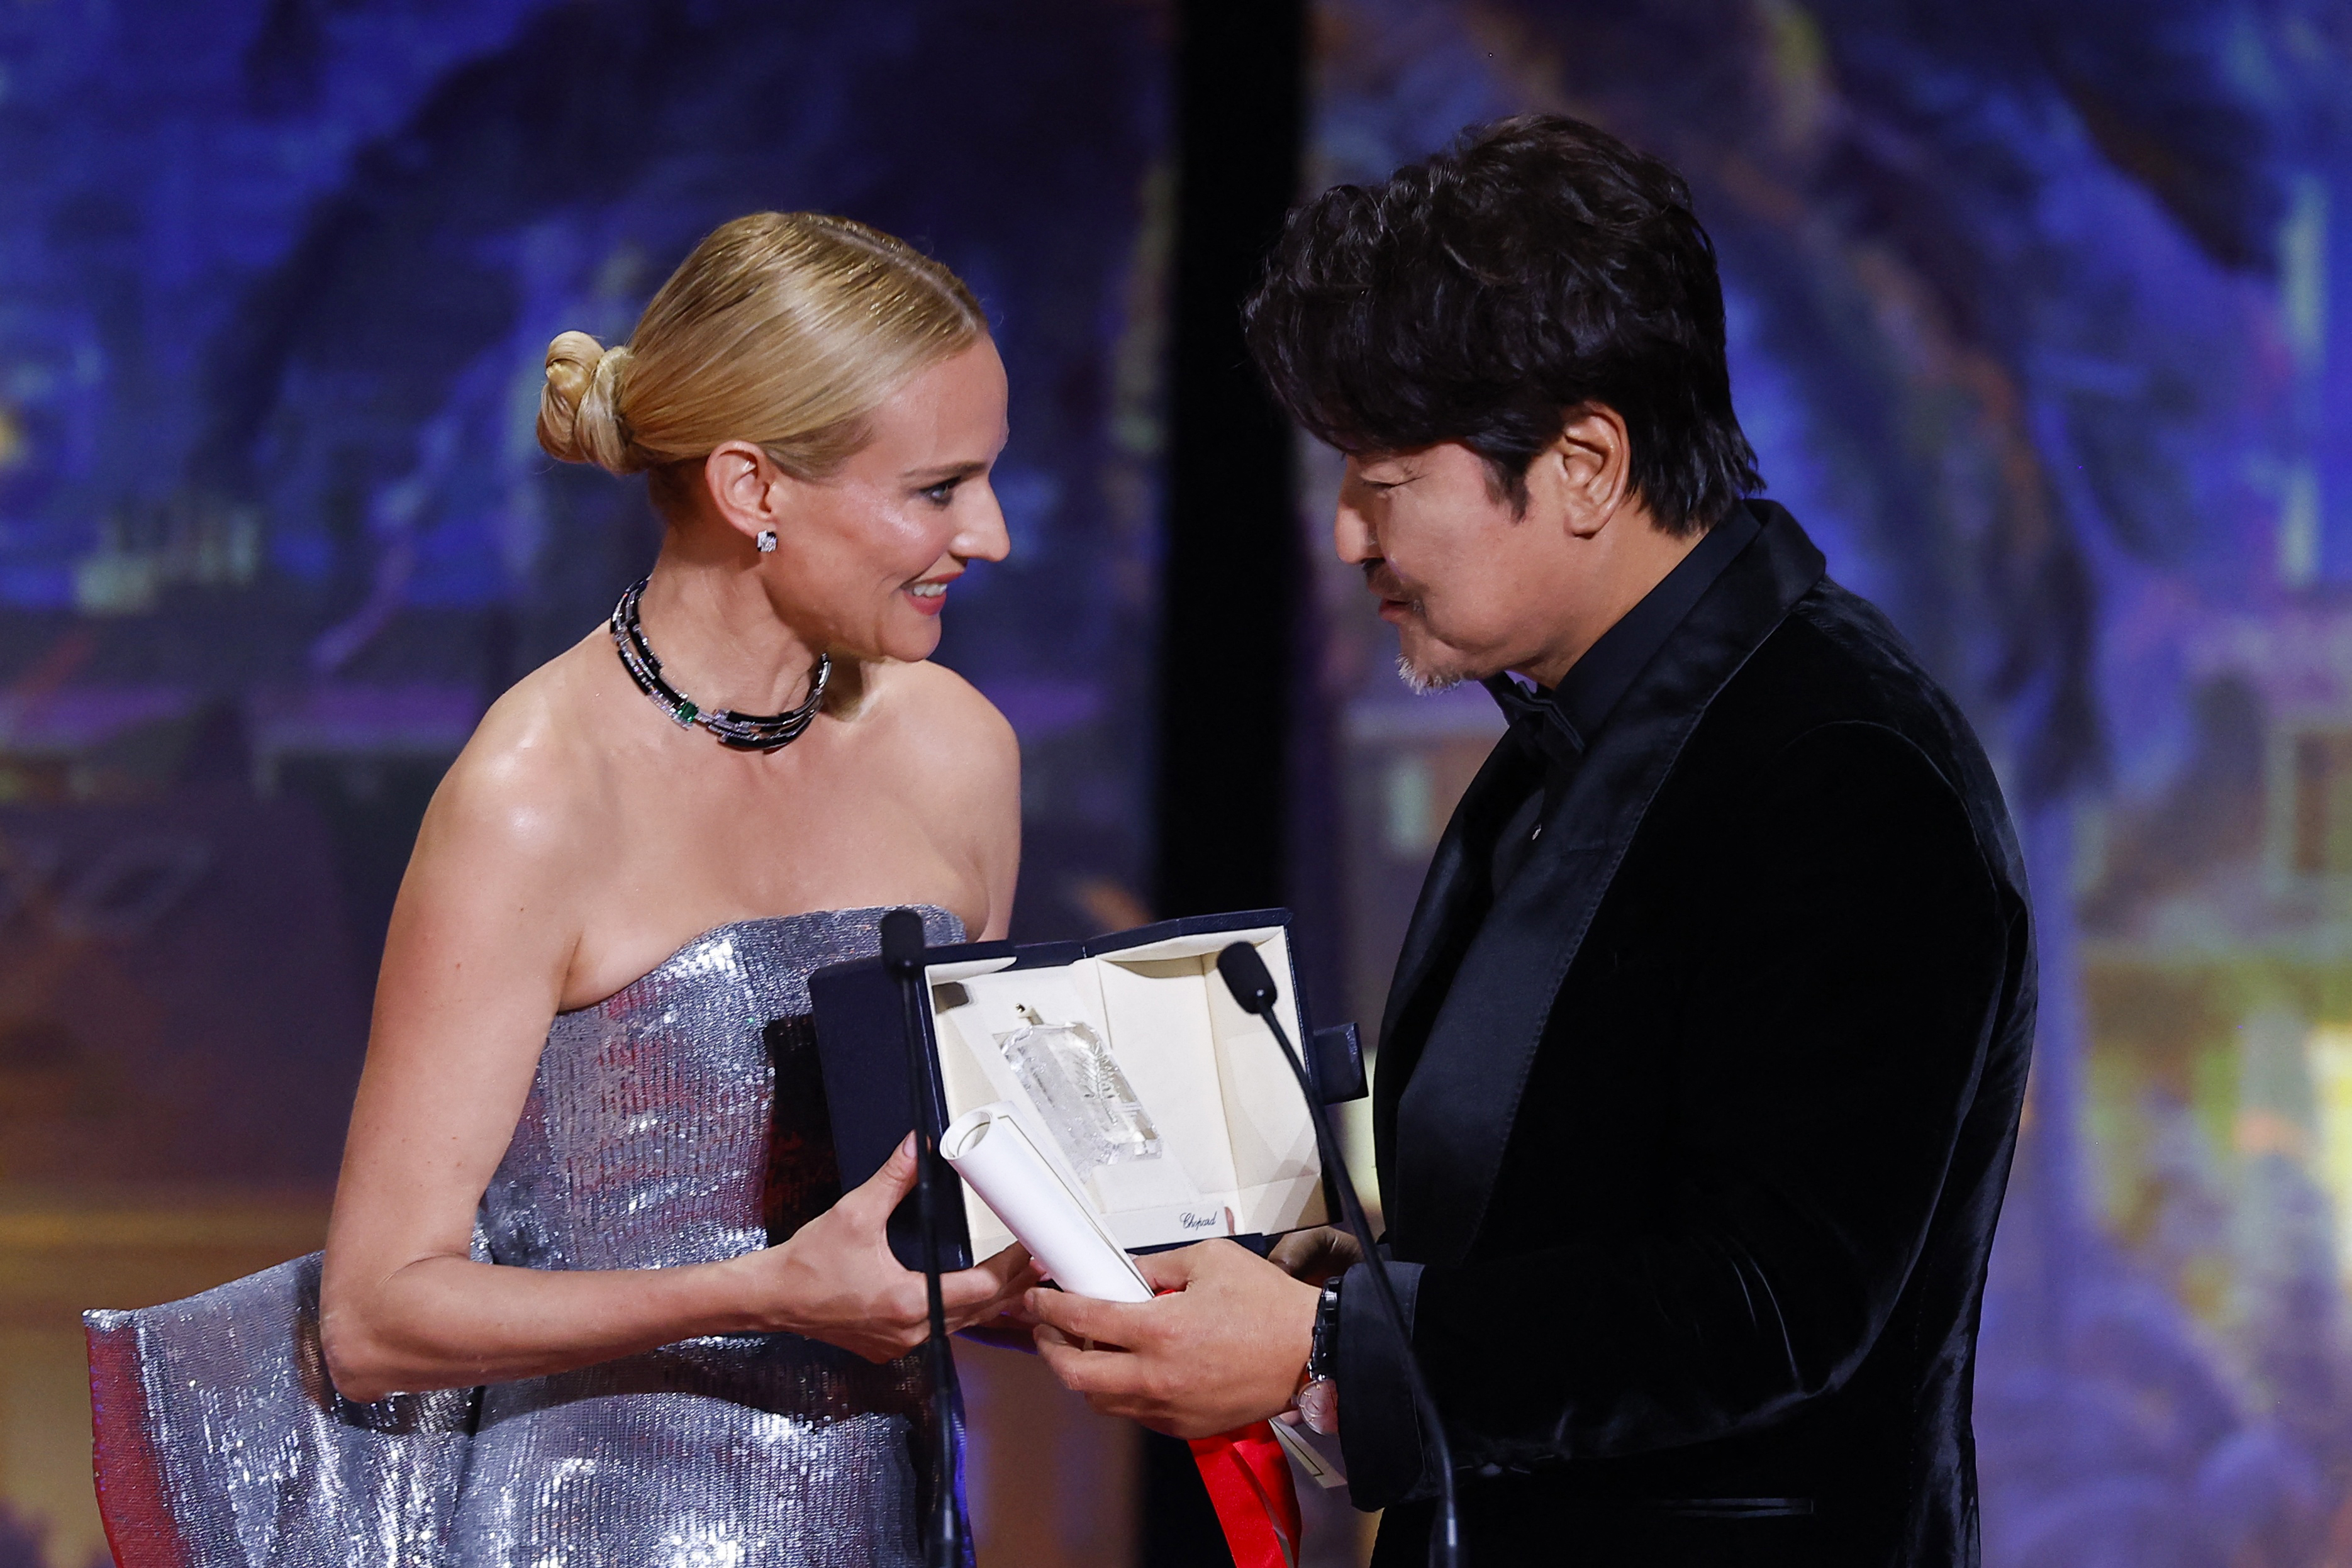 Diane Kruger presents the award to "best Actor" and Song Kang-ho, protagonist of "Broker". REUTERS/Eric Gaillard